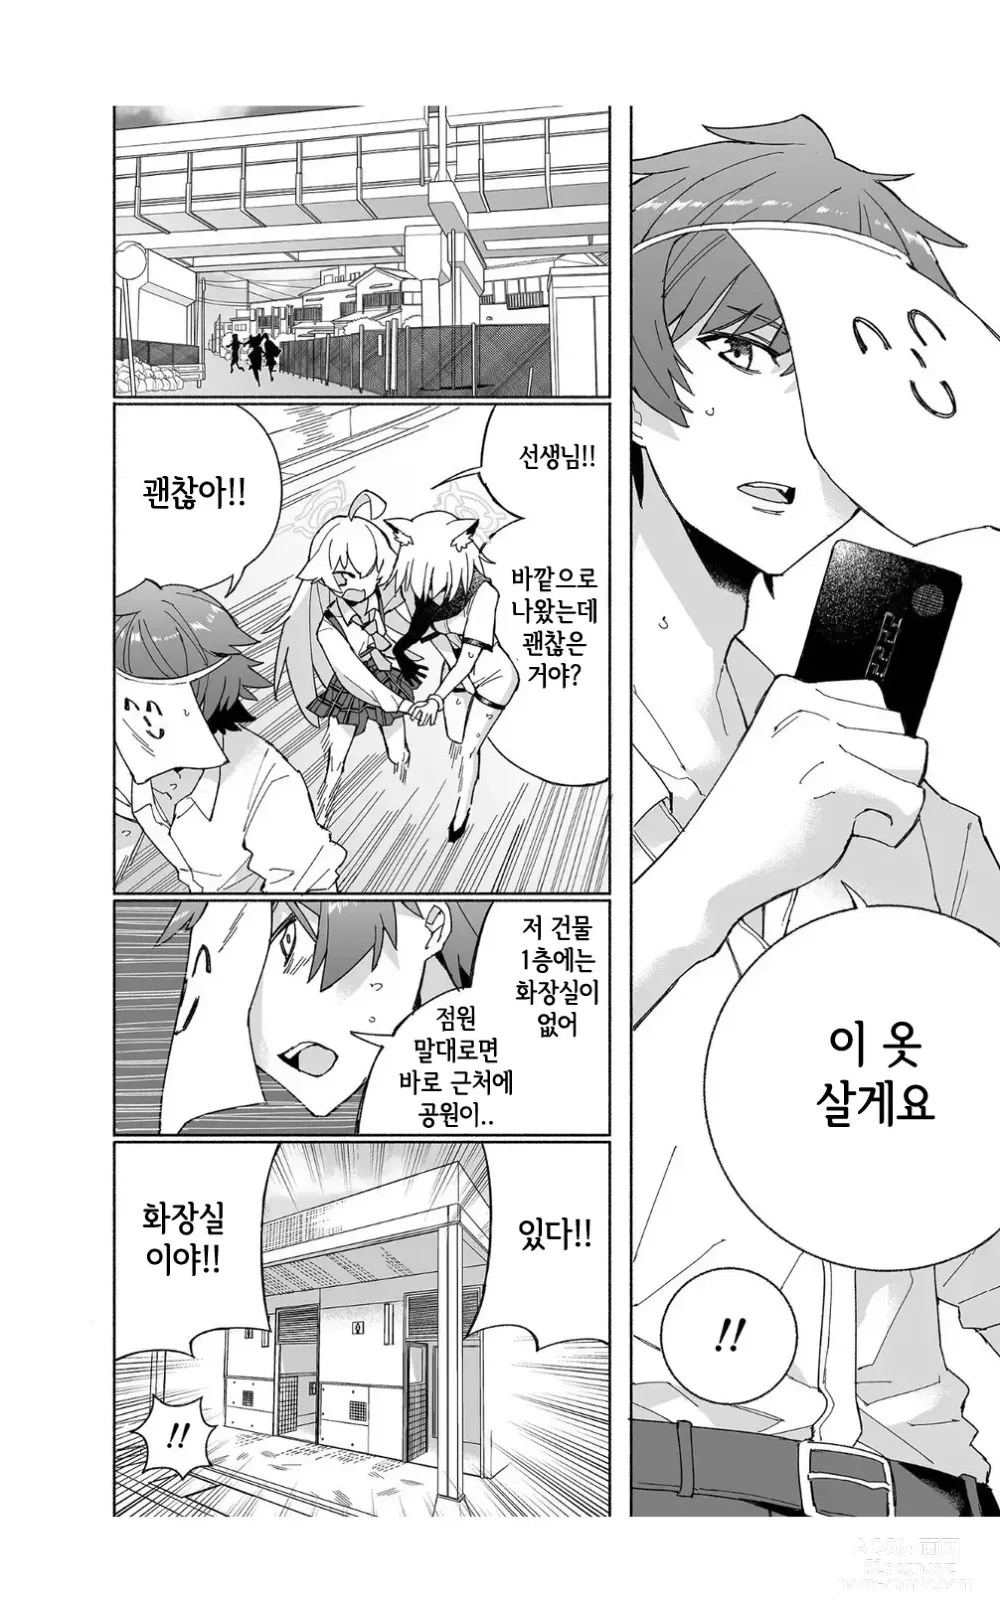 Page 17 of doujinshi 늑대의 물